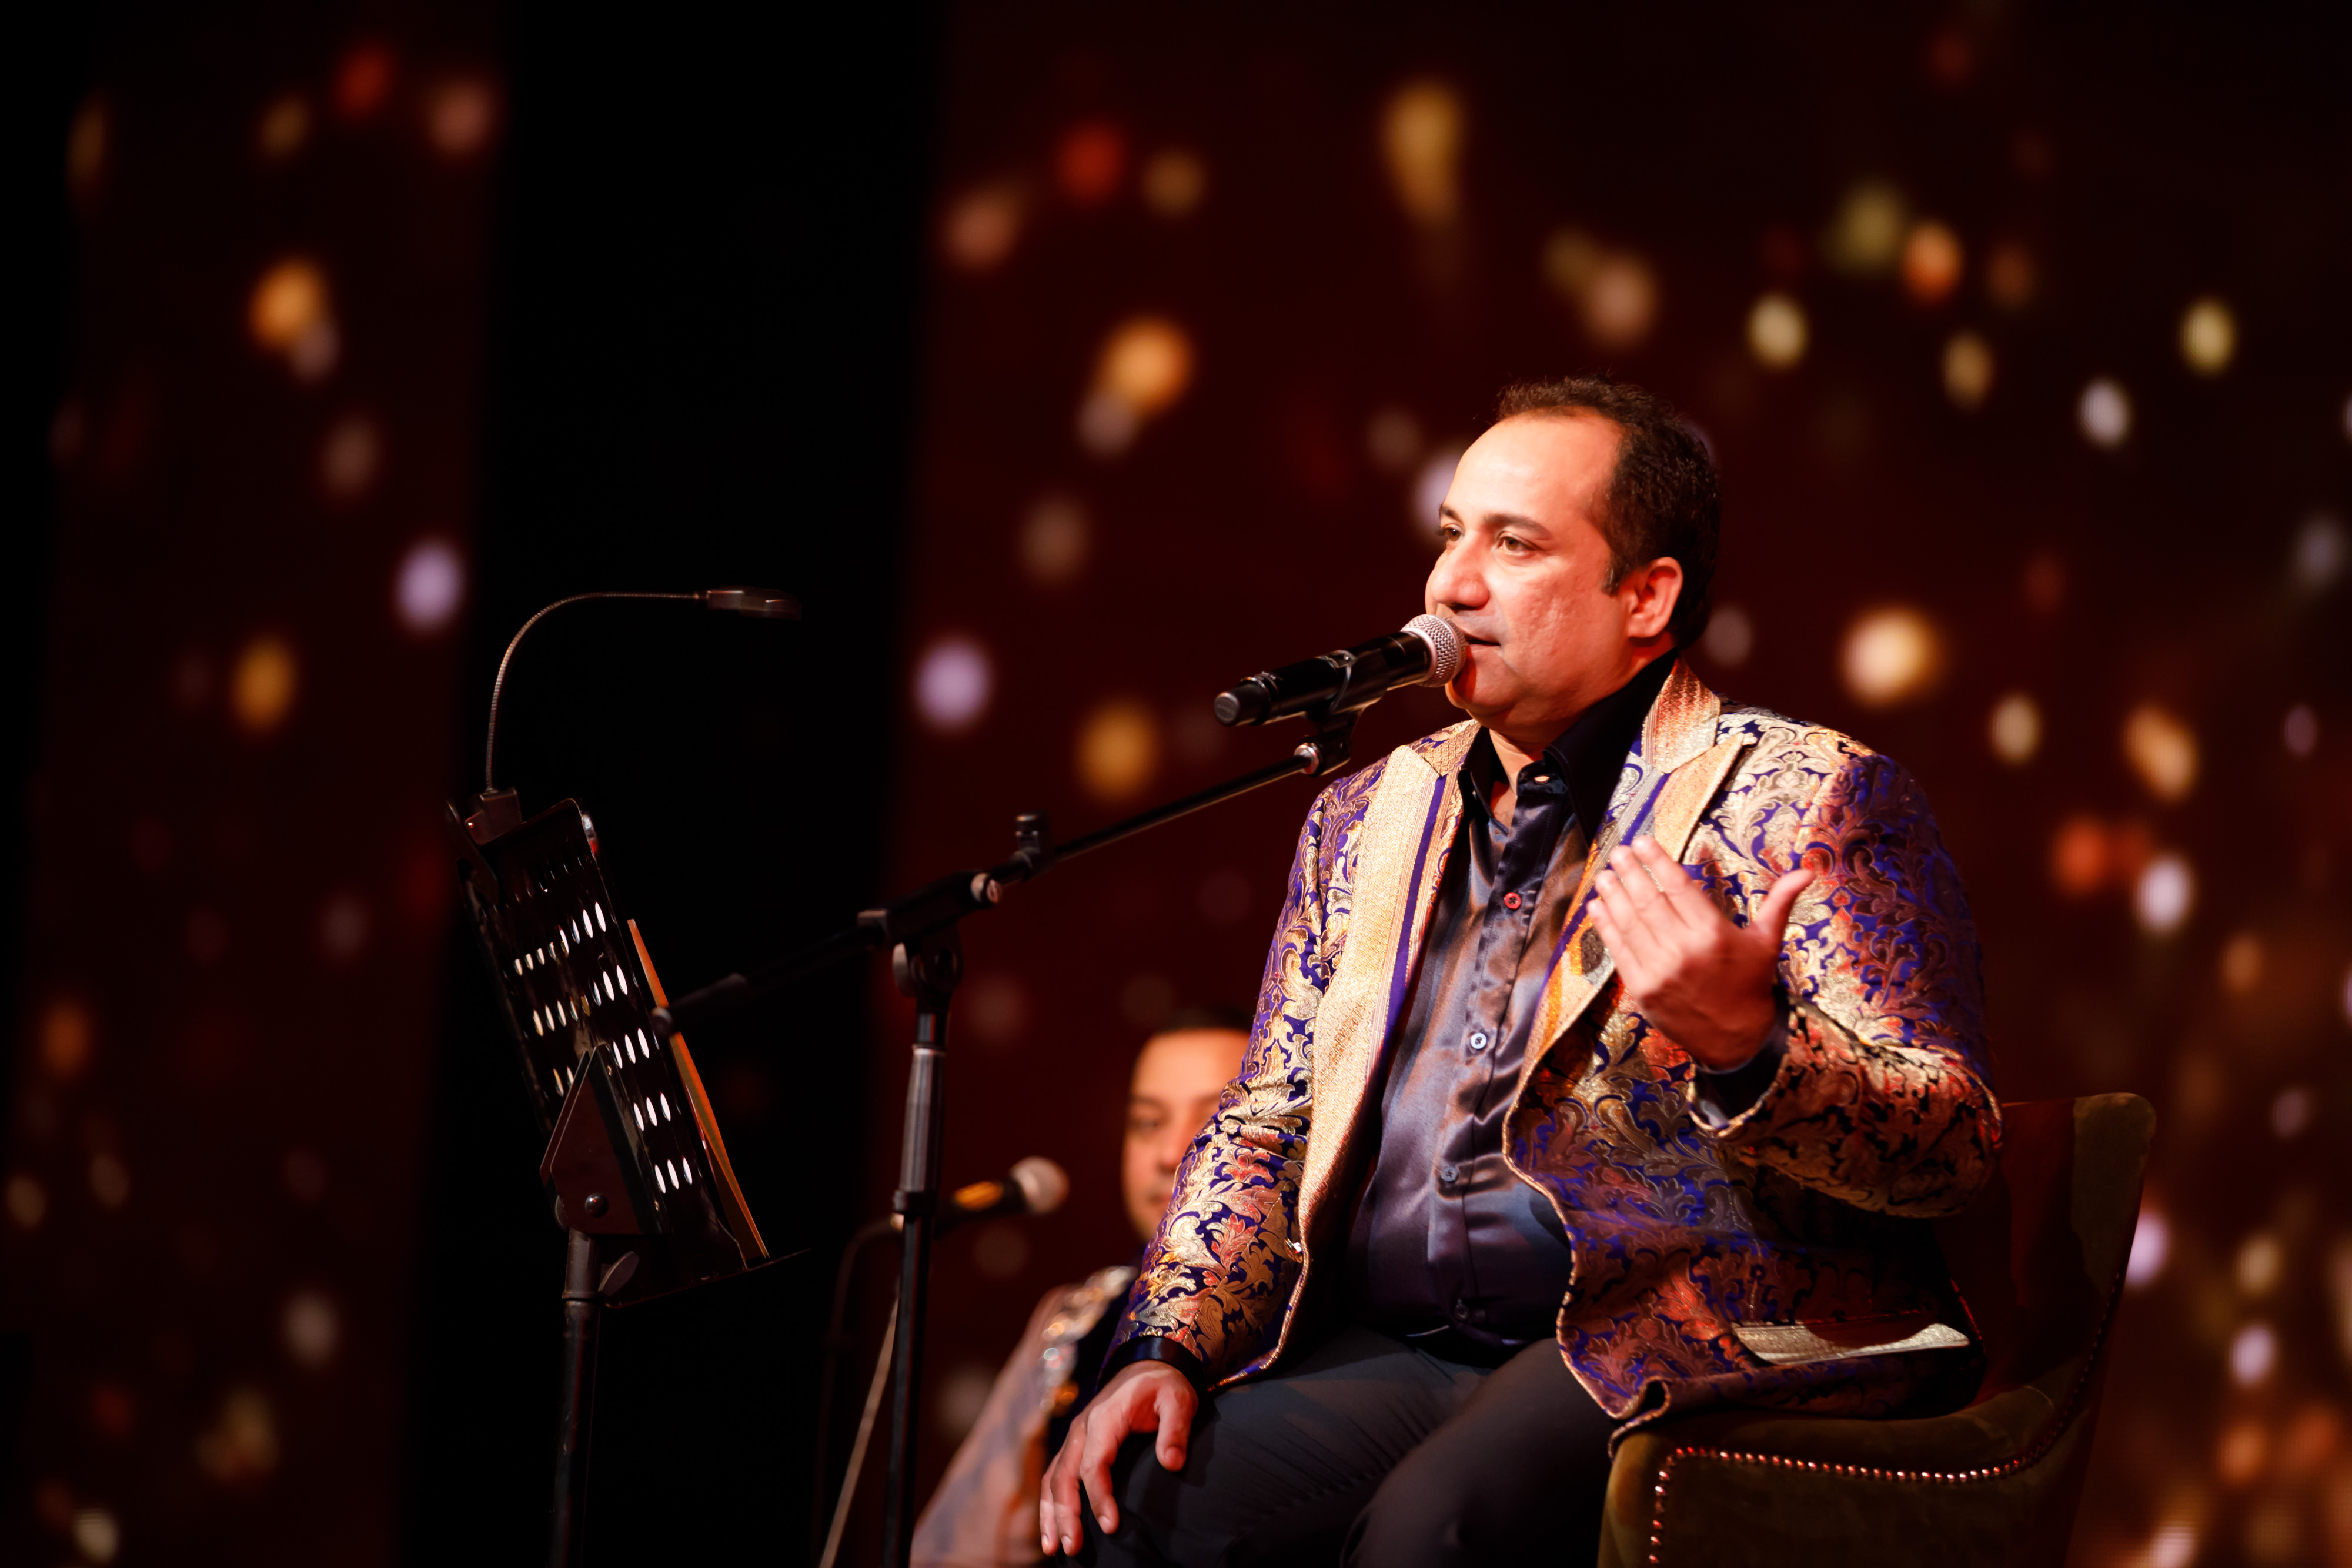 Music Maestro Rahat Fatah Ali Khan captivates the audience with his melodies during the New India: Emerging Global Leader event on August 9, 2017